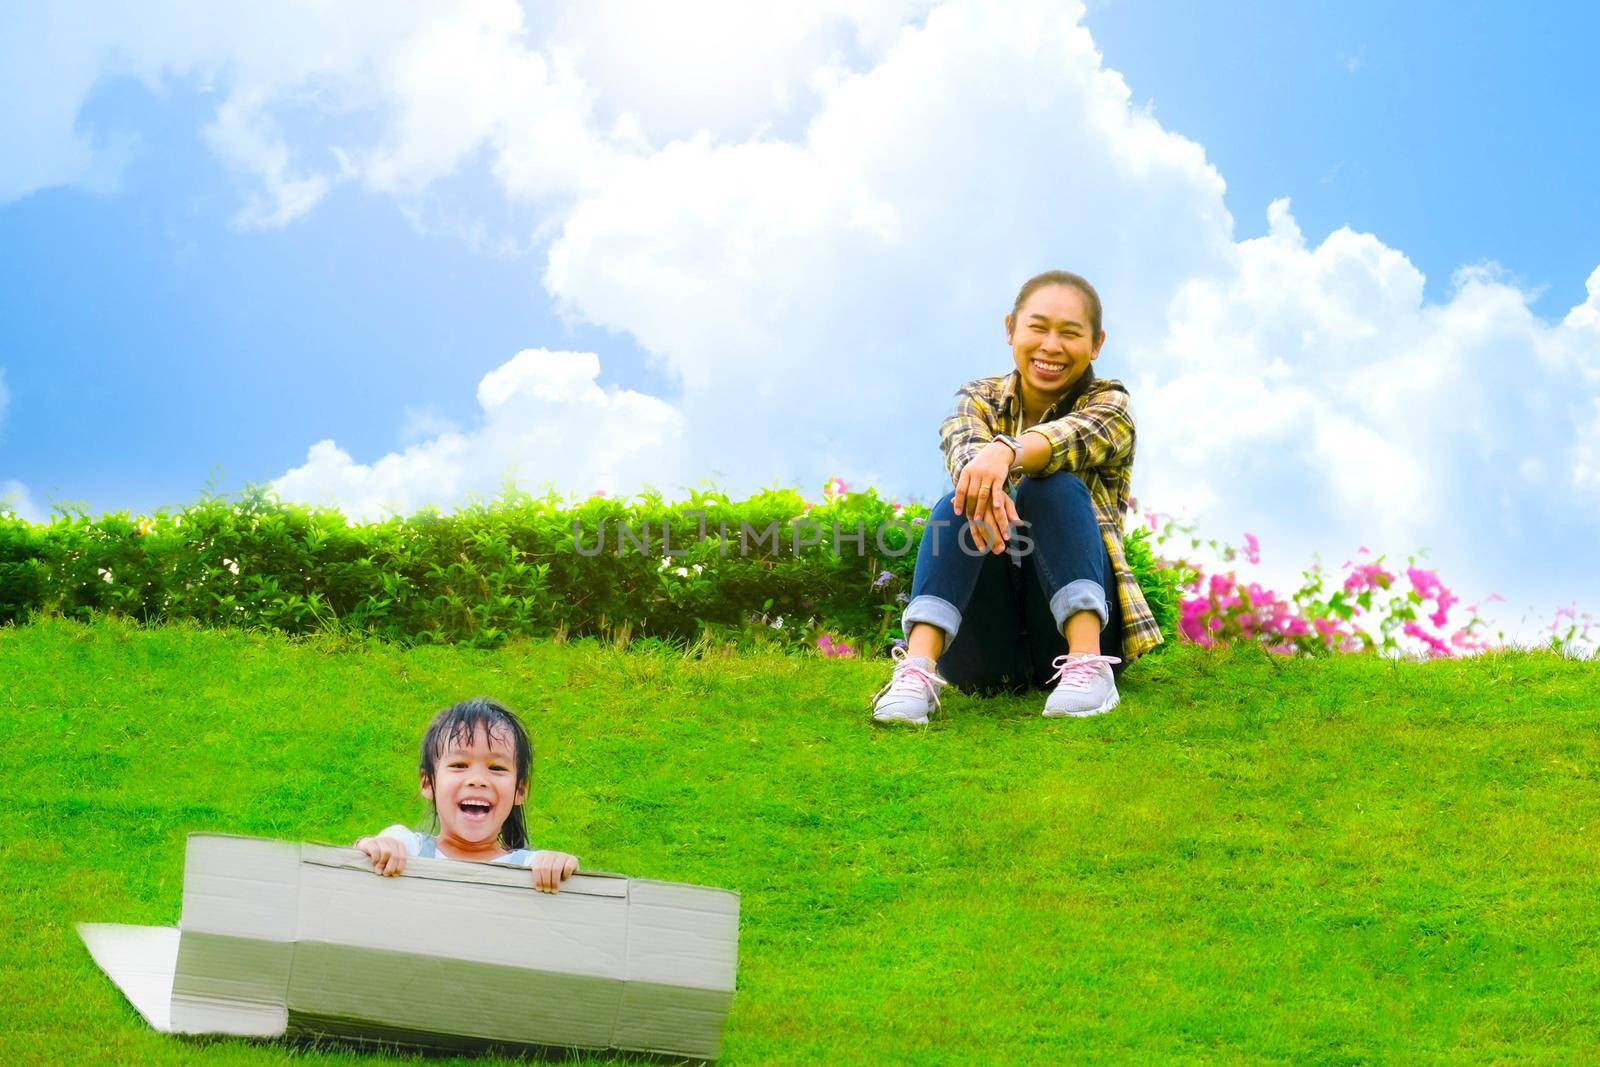 Smiling little girl sat on a cardboard box sliding down a hill at the Botanical Garden and her mother smiled as she looked at her. Happy childhood concept.